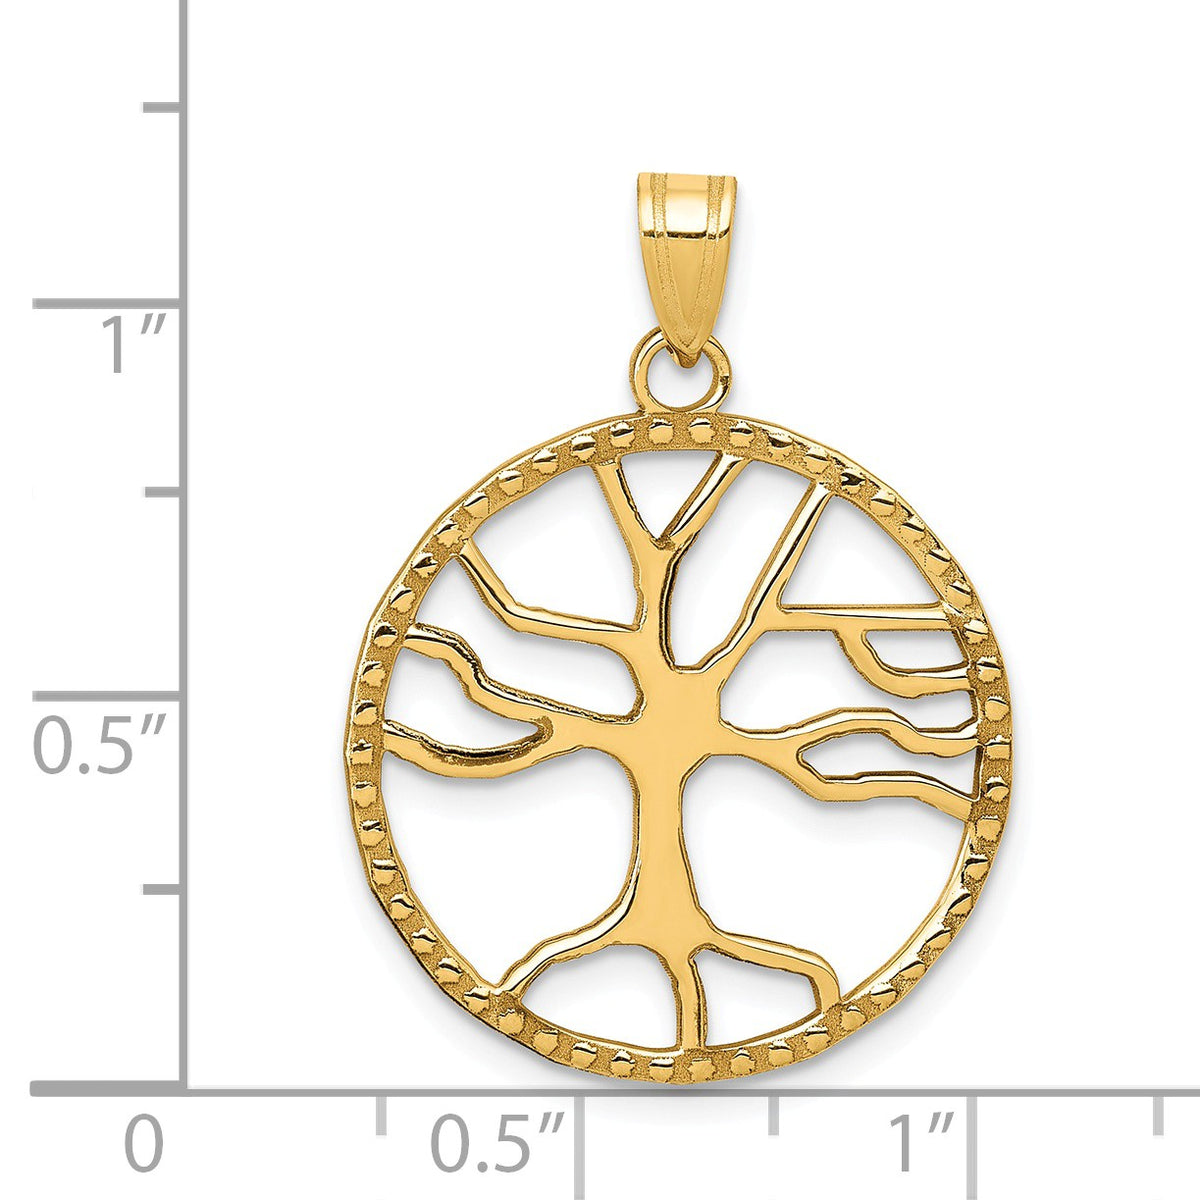 Alternate view of the 14k Yellow Gold Round Framed Tree of Life Pendant, 20mm (3/4 inch) by The Black Bow Jewelry Co.